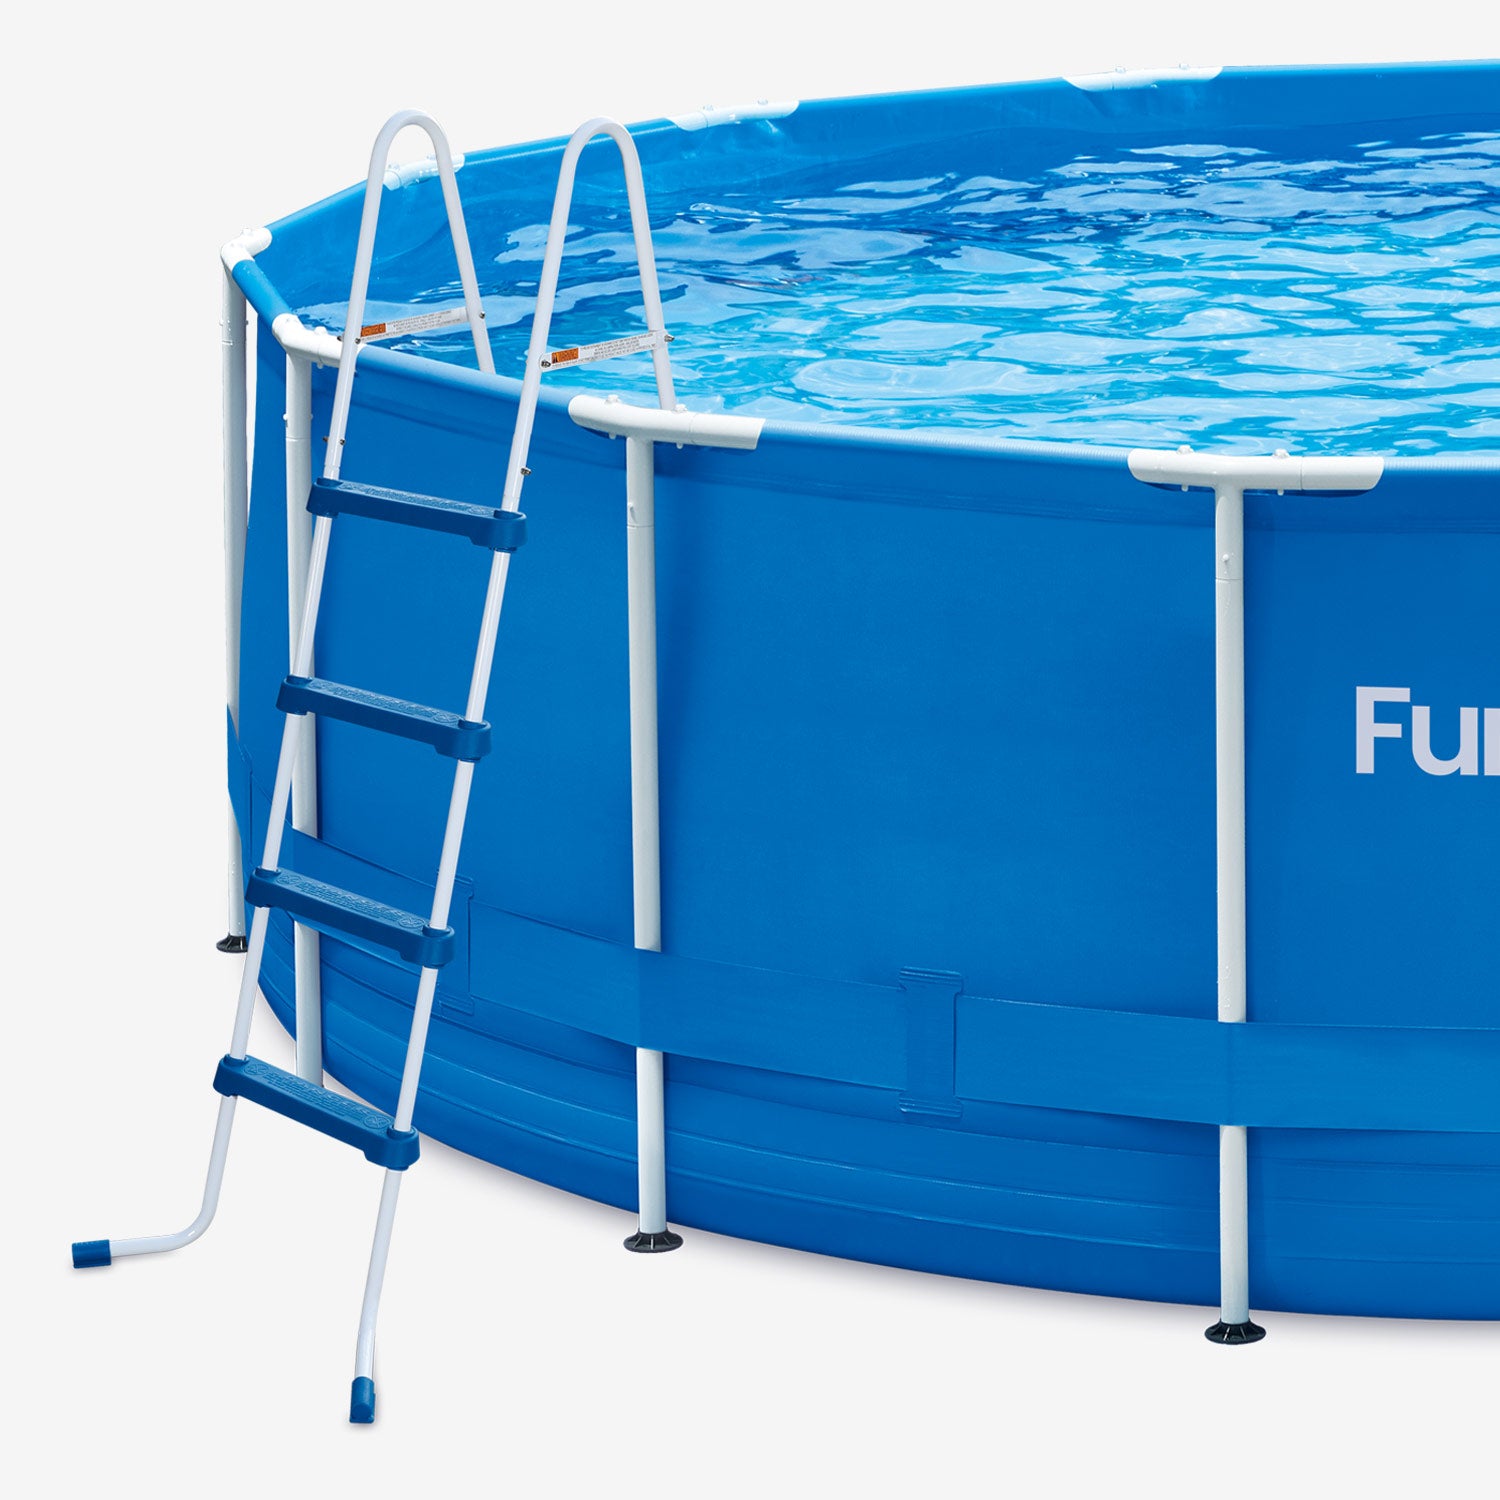 Funsicle 52" SureStep Ladder next to Funsicle Activity Pool